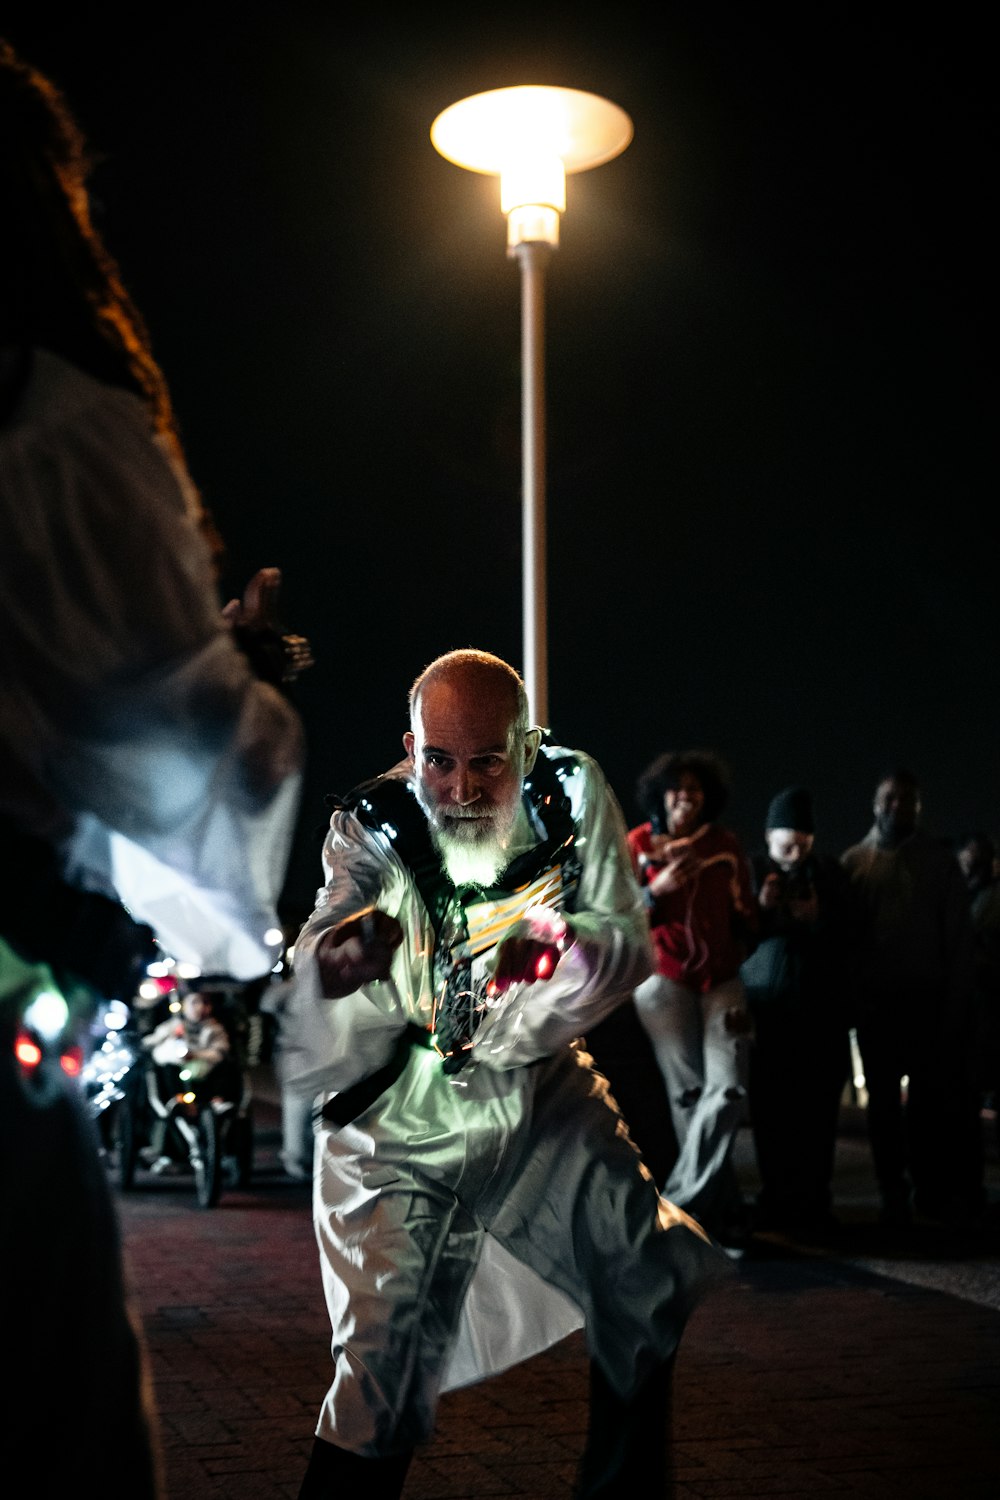 man in white and green costume standing on street during nighttime